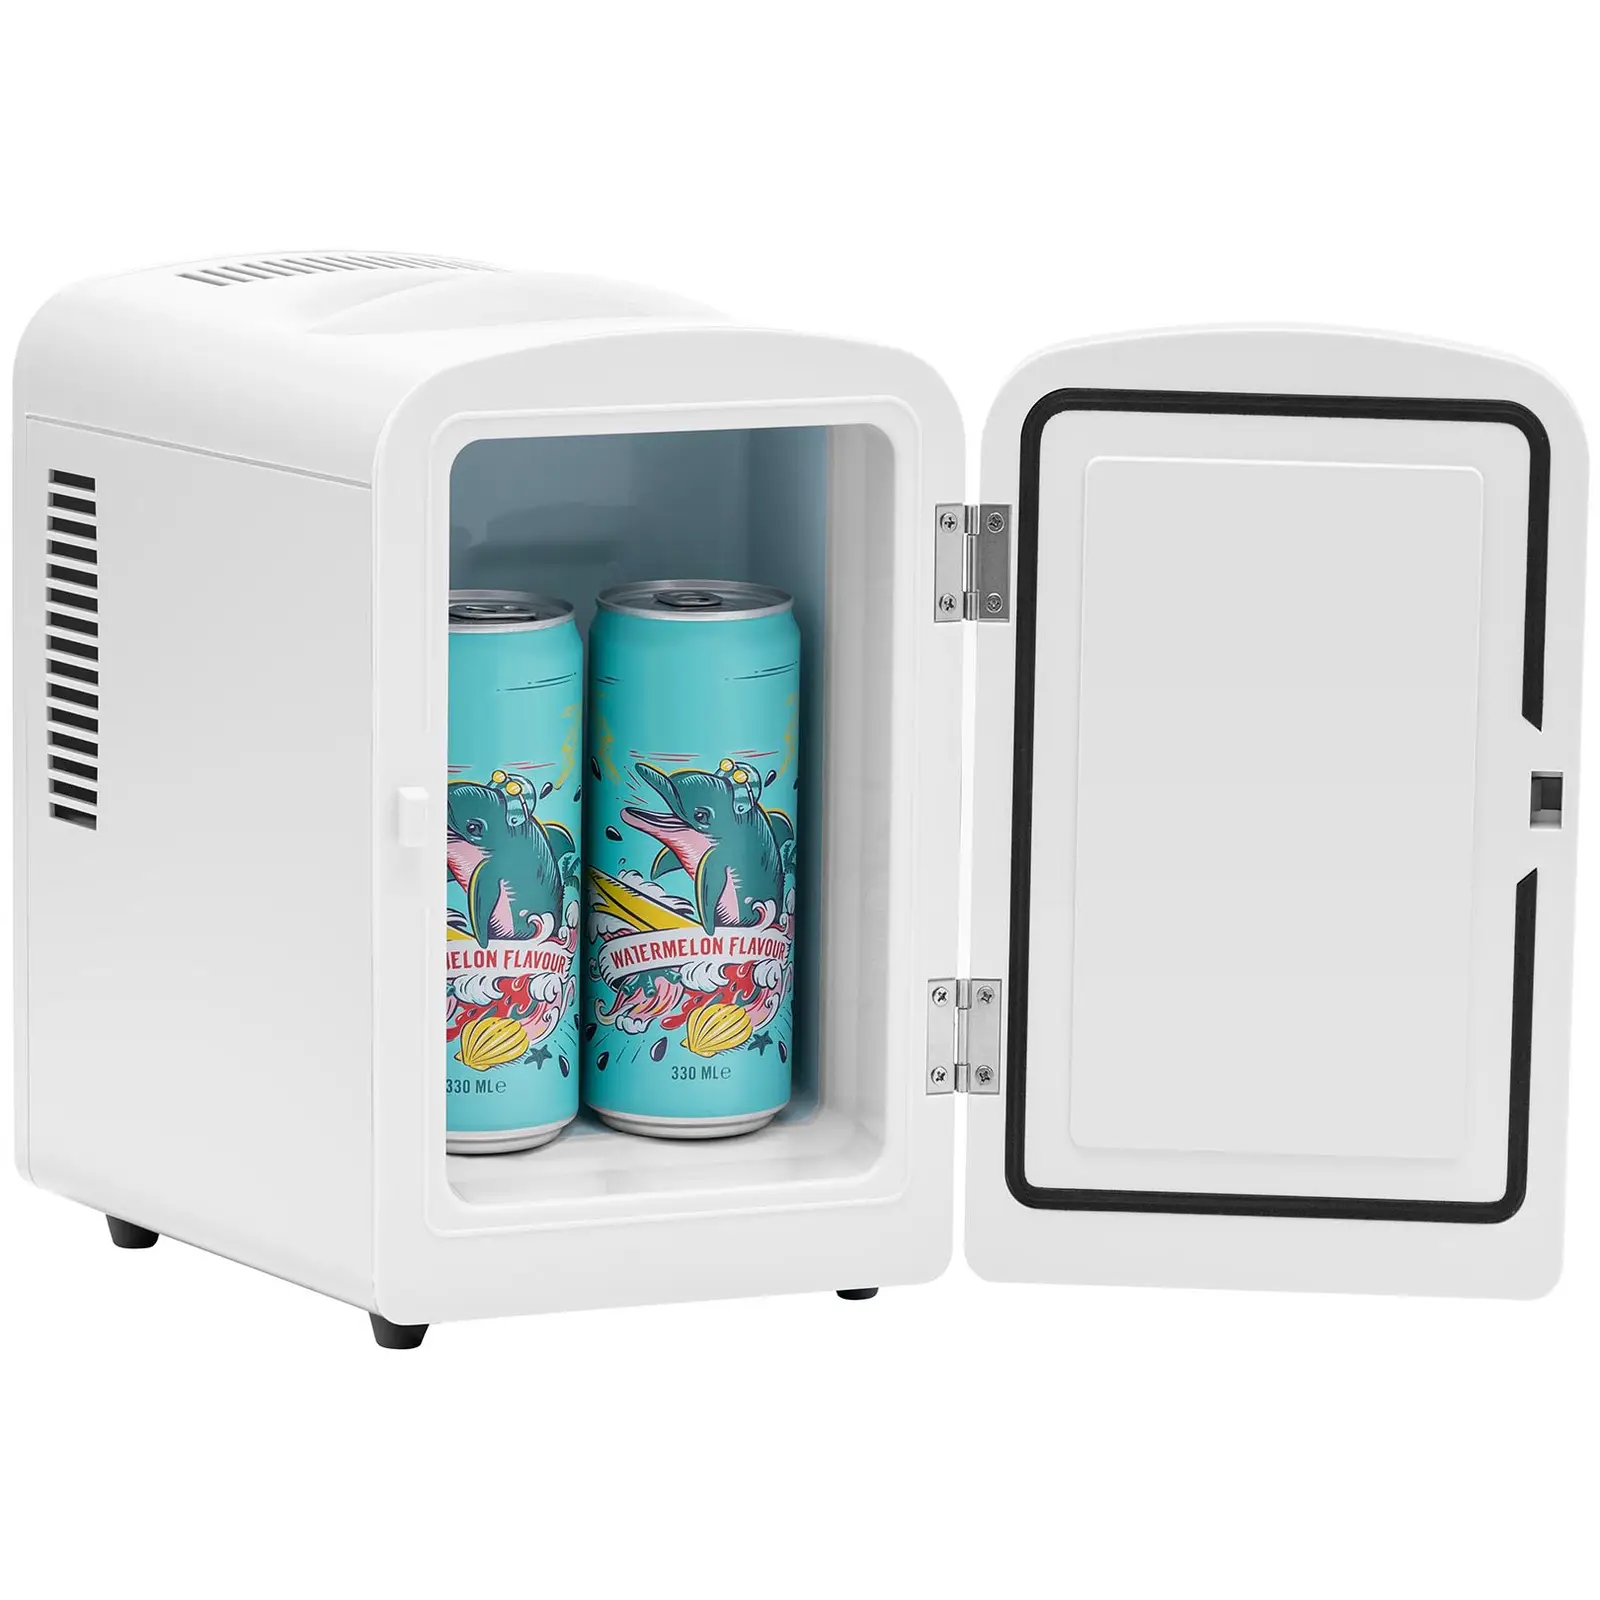 Mini Refrigerator 12 V / 230 V - 2-in-1 appliance with keep-warm function - 4 L - white